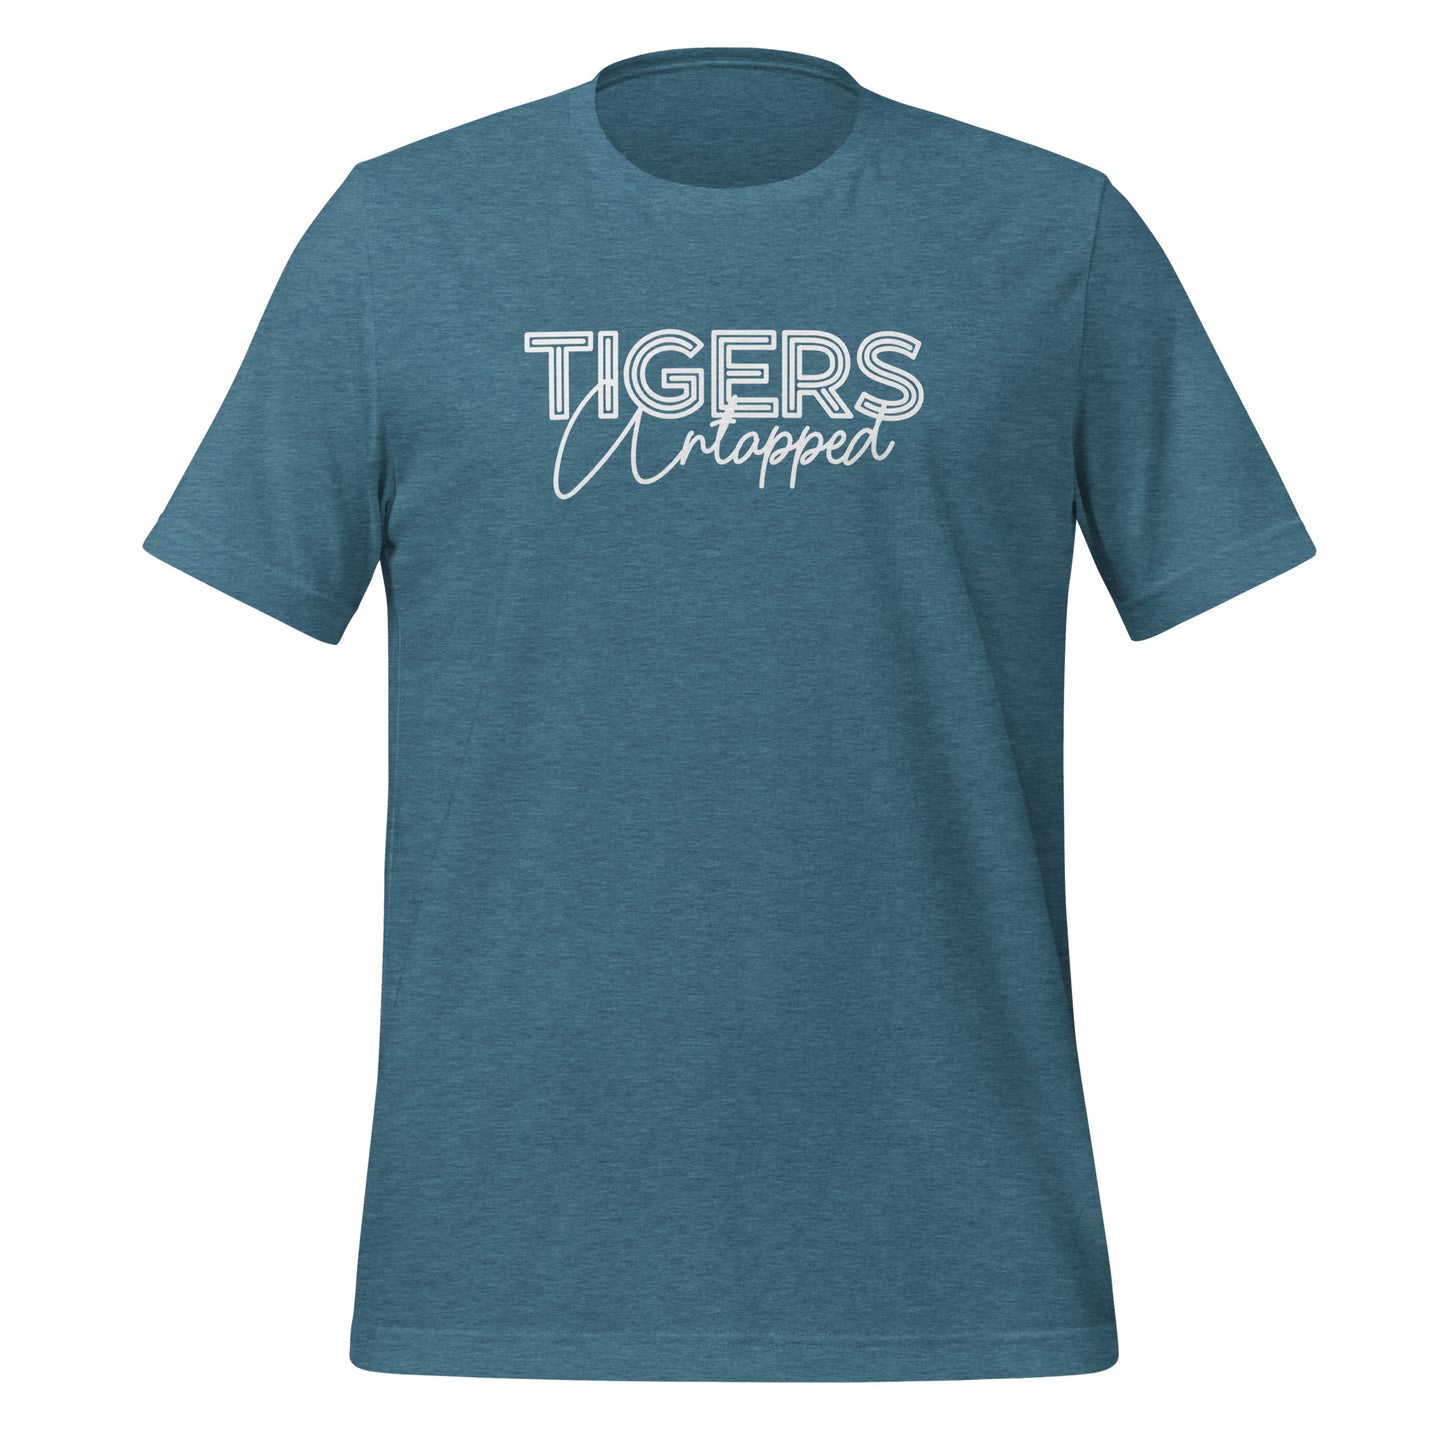 Tigers Untapped White Tee